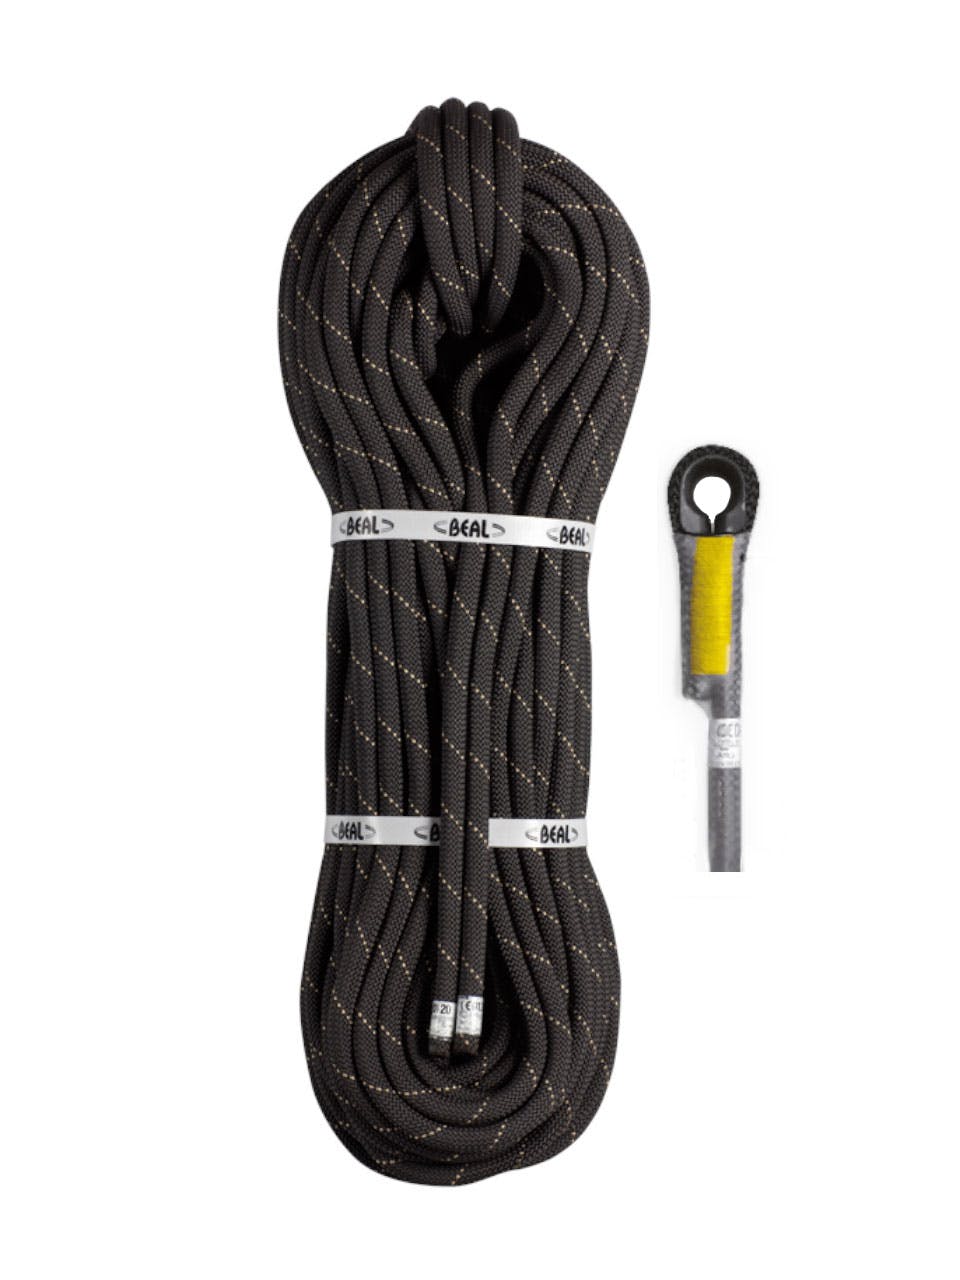 https://images.abaris.co.uk/products/1330/beal-11mm-semi-static-low-stretch-raider-rope%20%281%29.jpg?auto=format